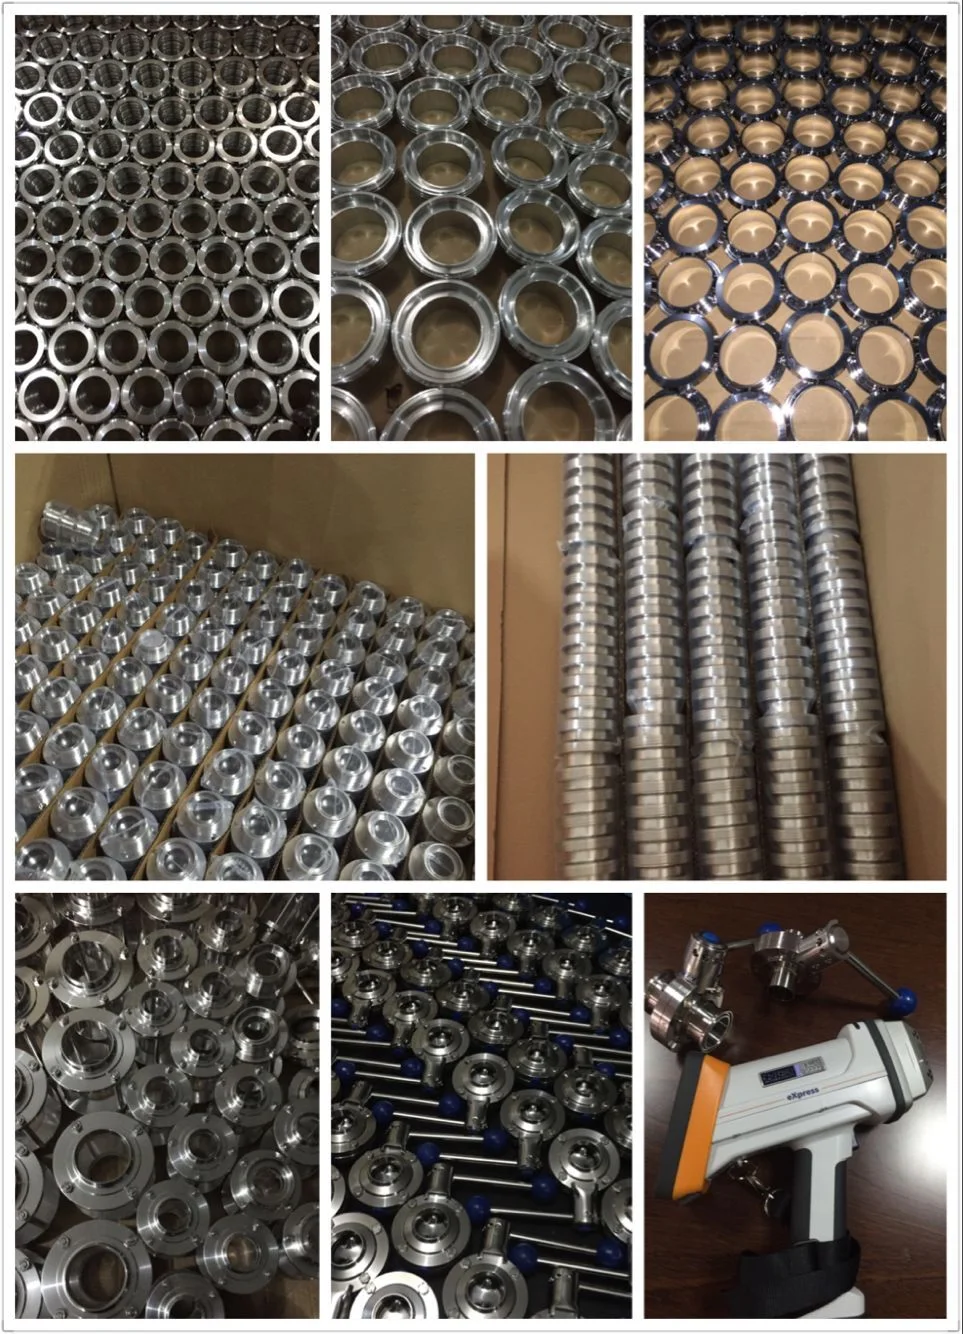 China Supplier of Stainless Steel Food Grade Manual Sanitary Butterfly Valve Welded/Welded